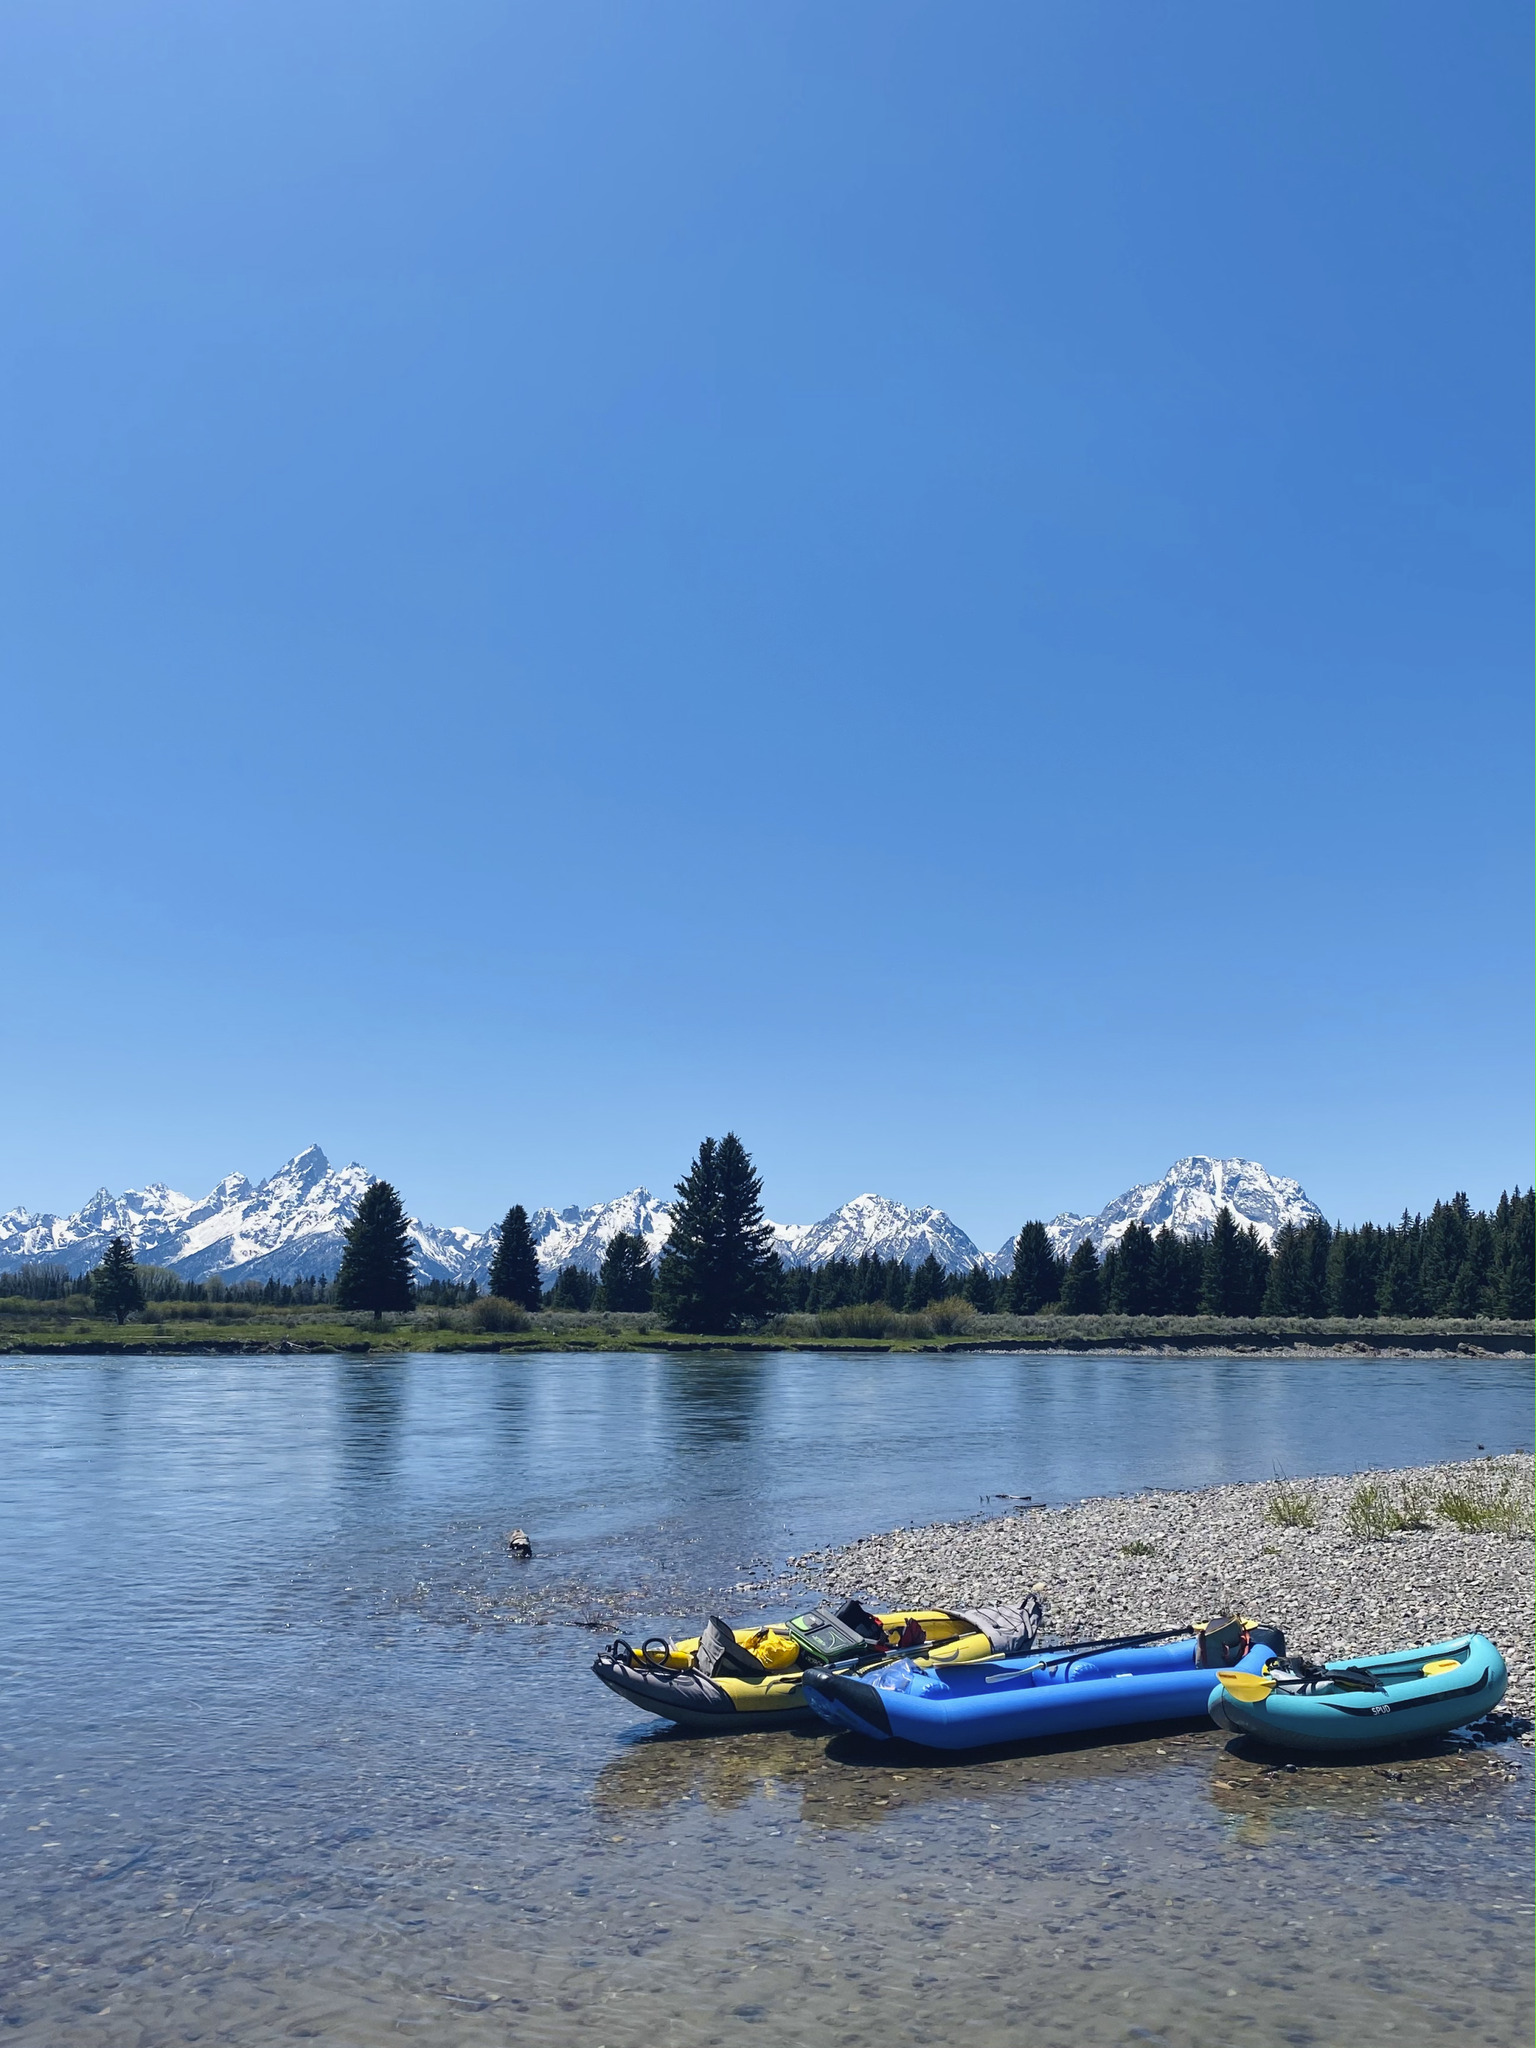 Long trees and snowy peaks frame three colorful rafting boats docking at the river-shore.